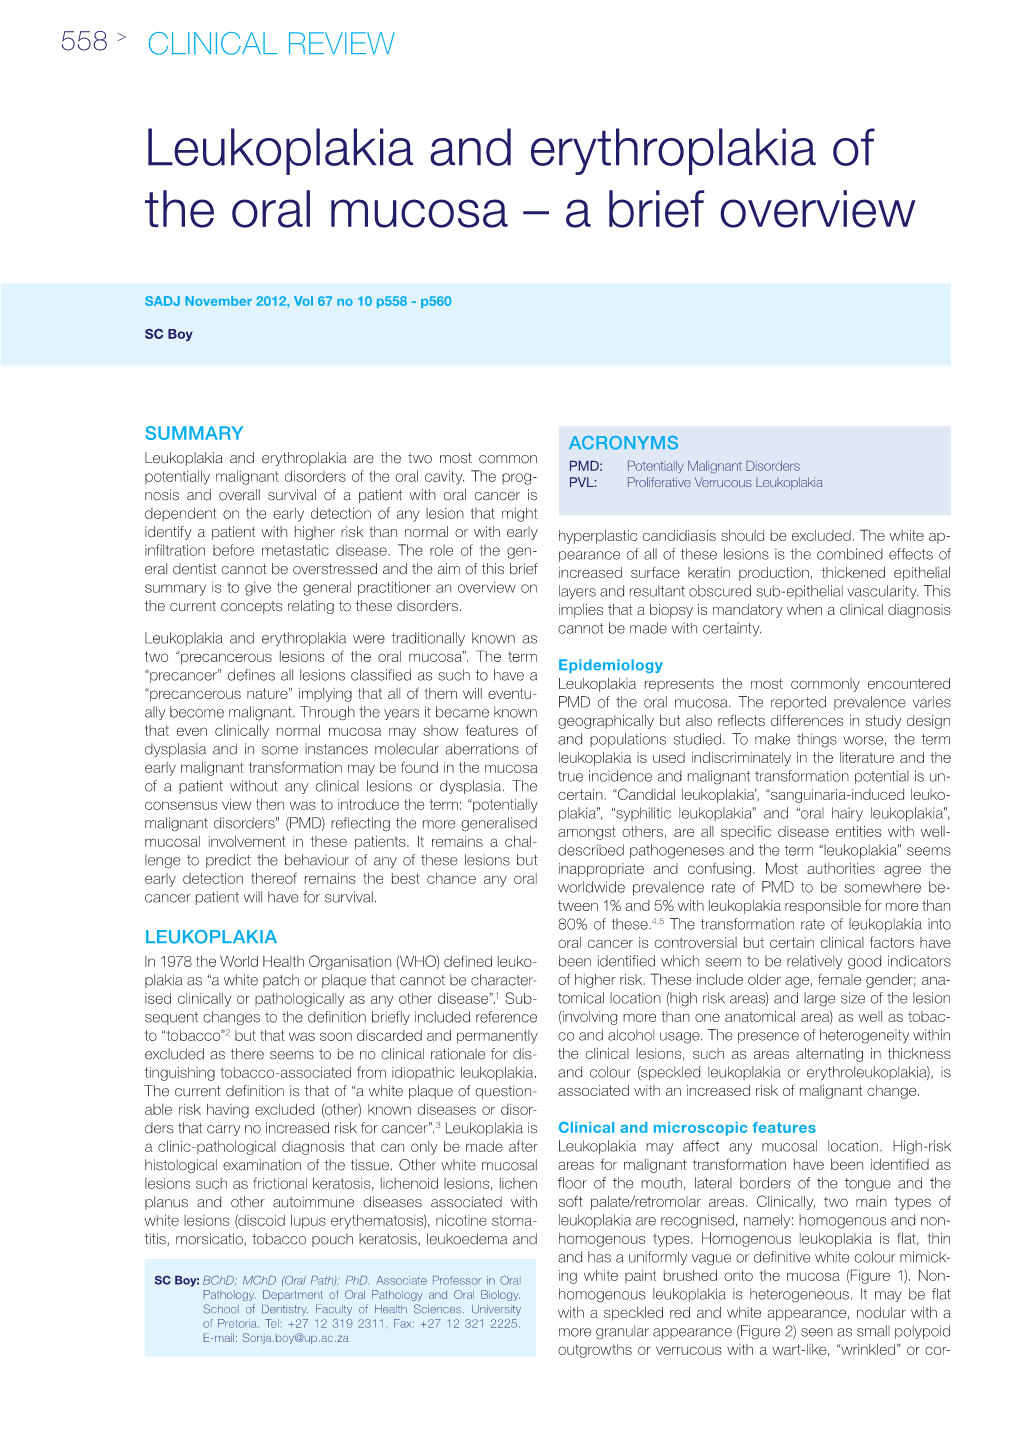 Leukoplakia and Erythroplakia of the Oral Mucosa – a Brief Overview